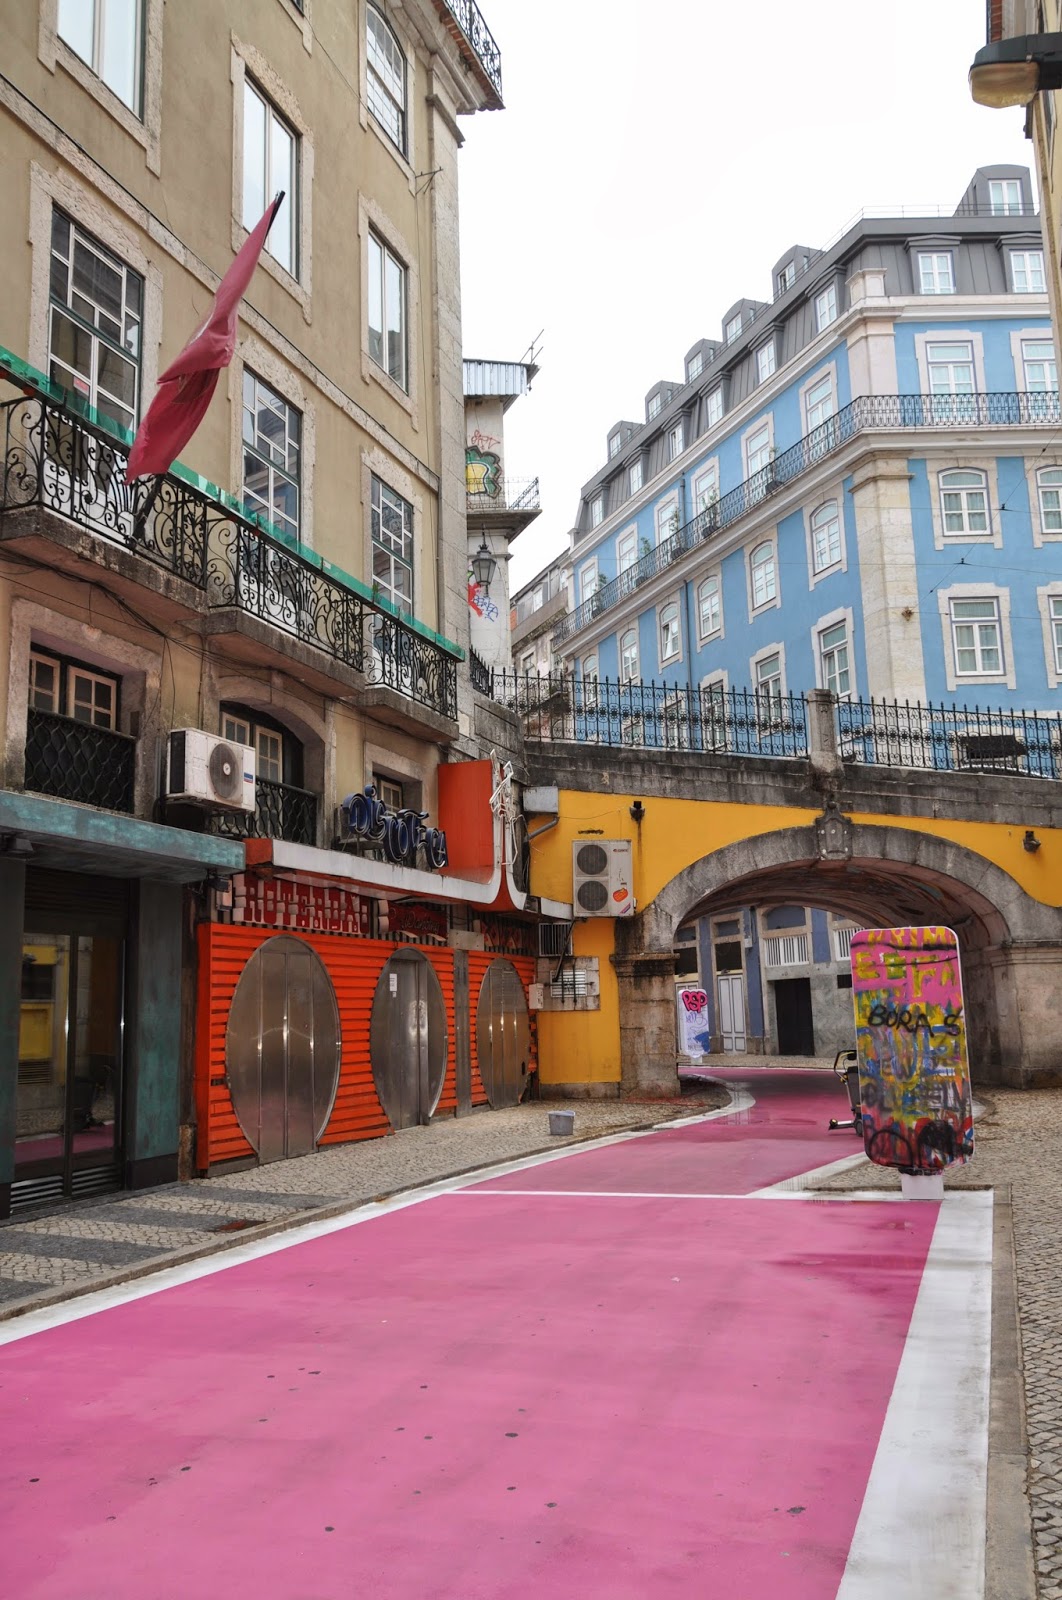 iolanda andrade: The pink street in Cais do Sodré area, Lisbon - The 26th of October 20131062 x 1600